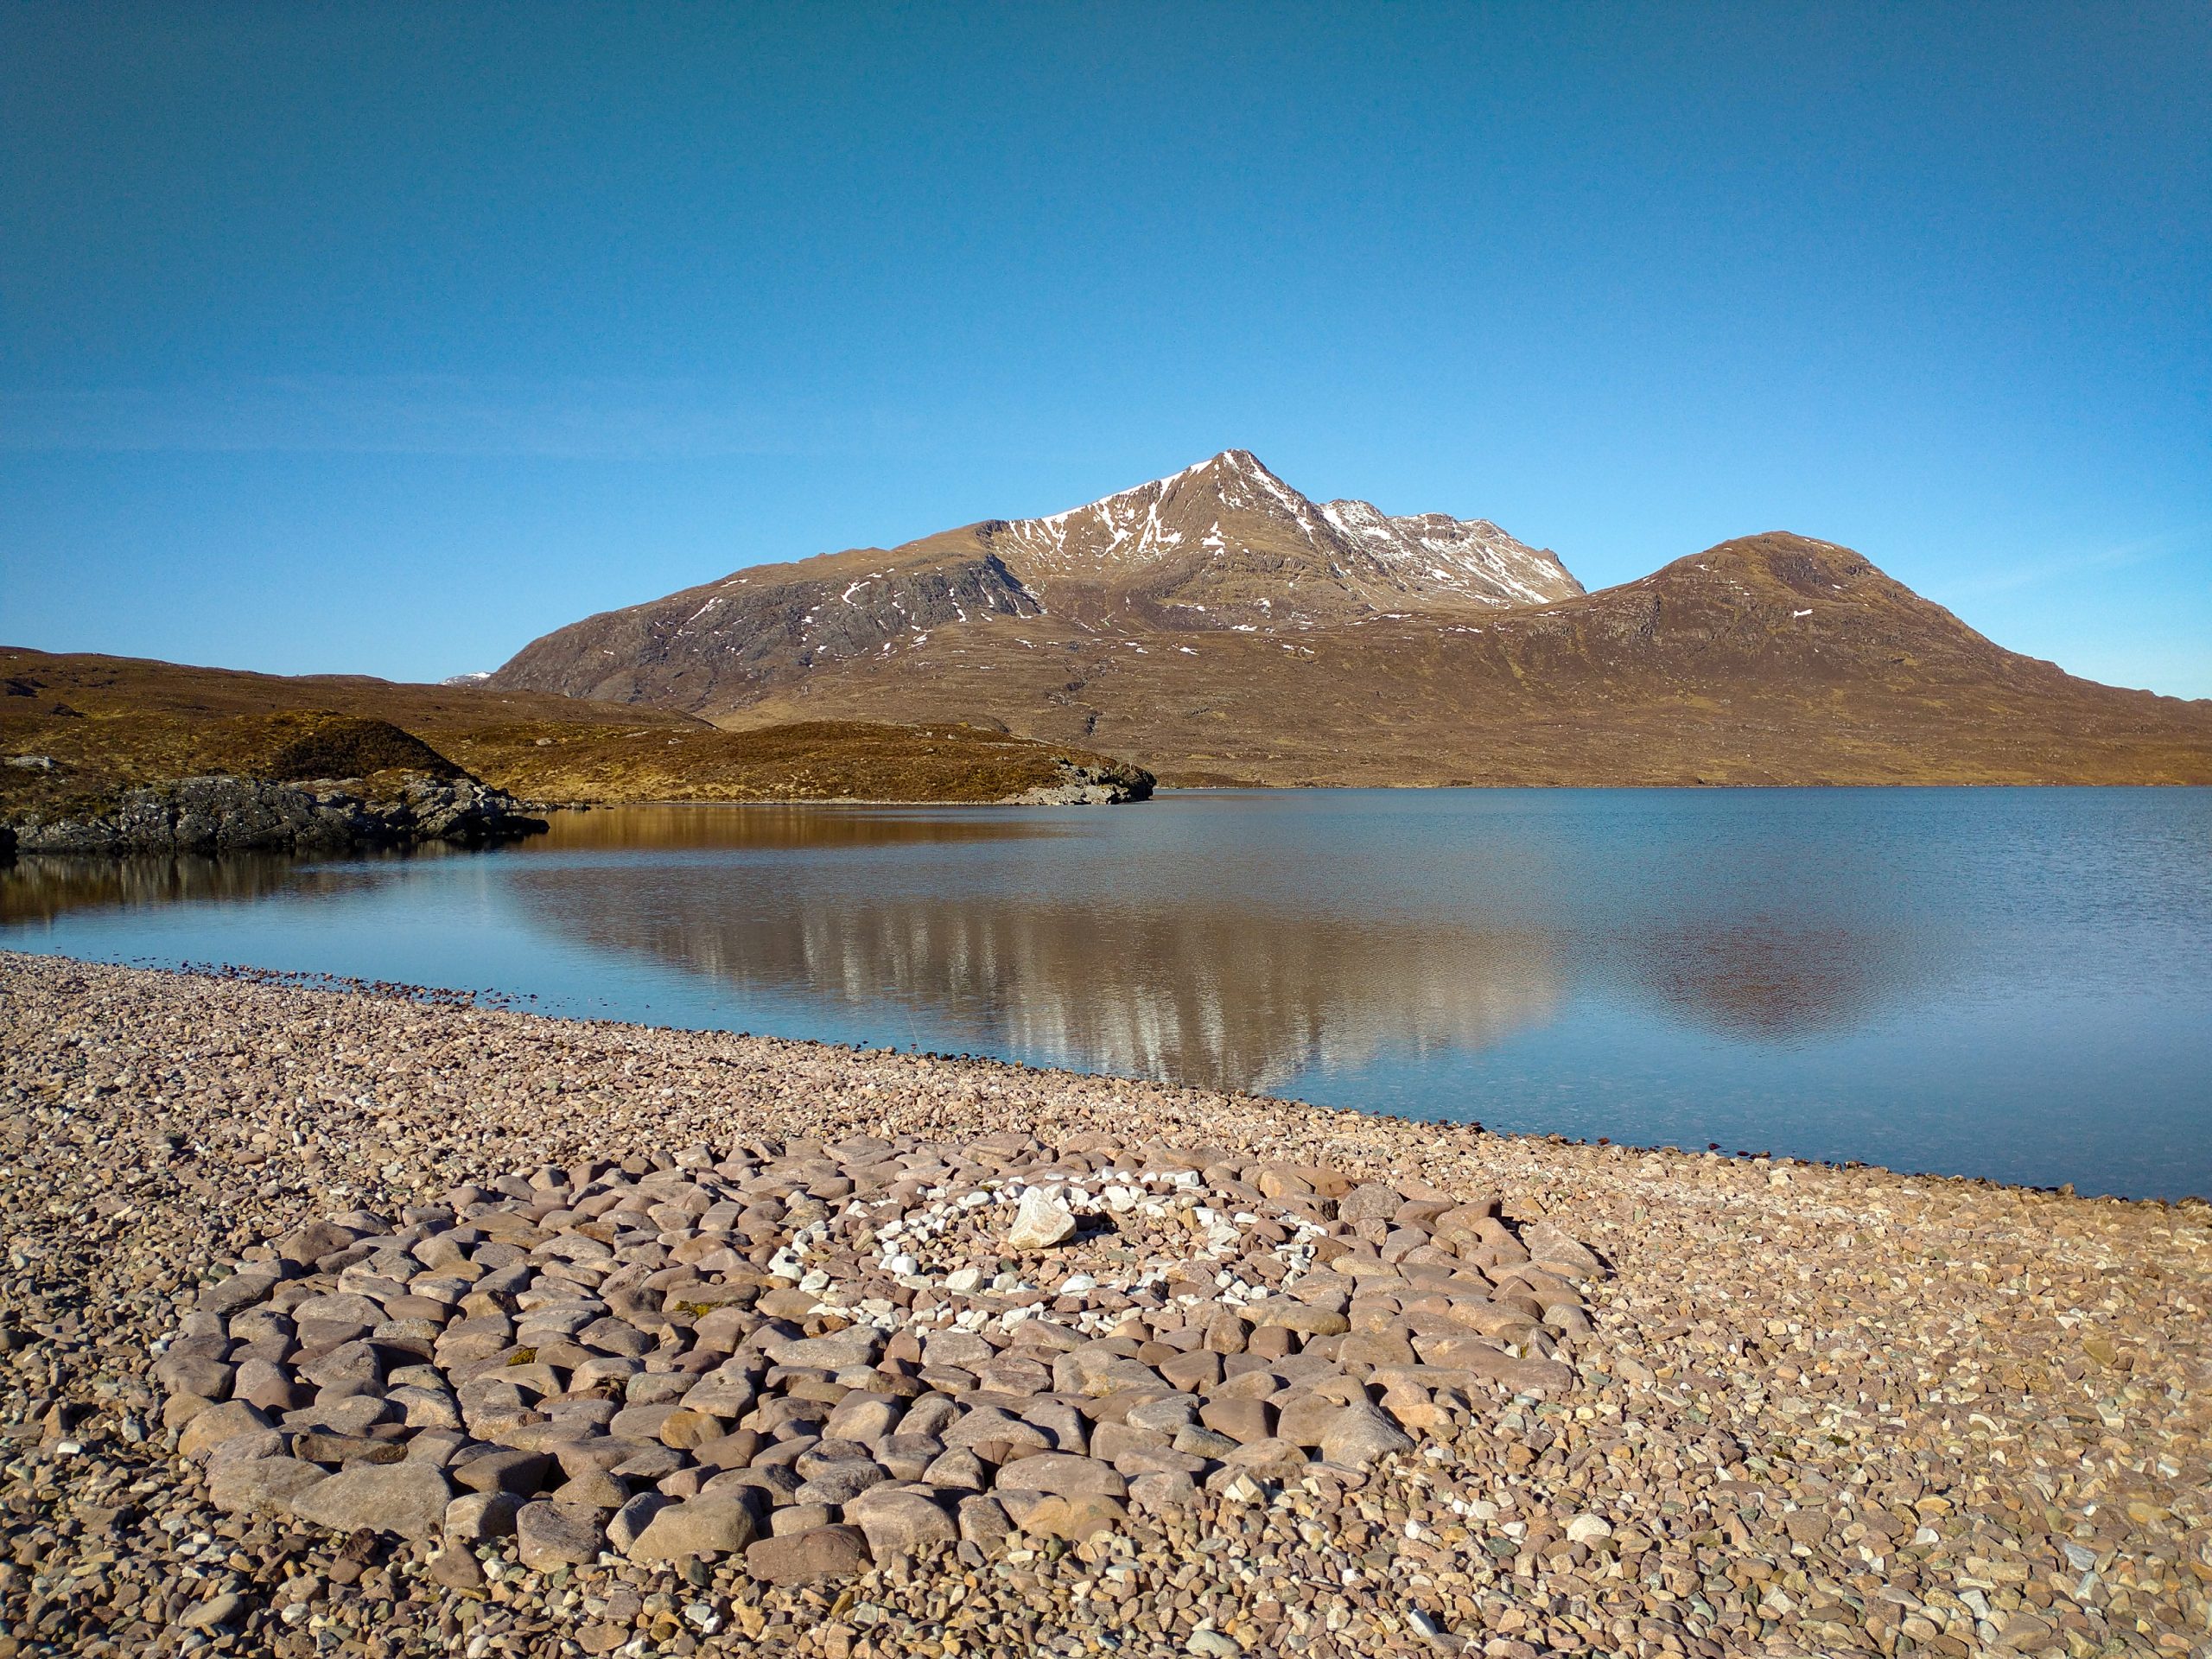 View over Slioch from the shore of Loch Fada